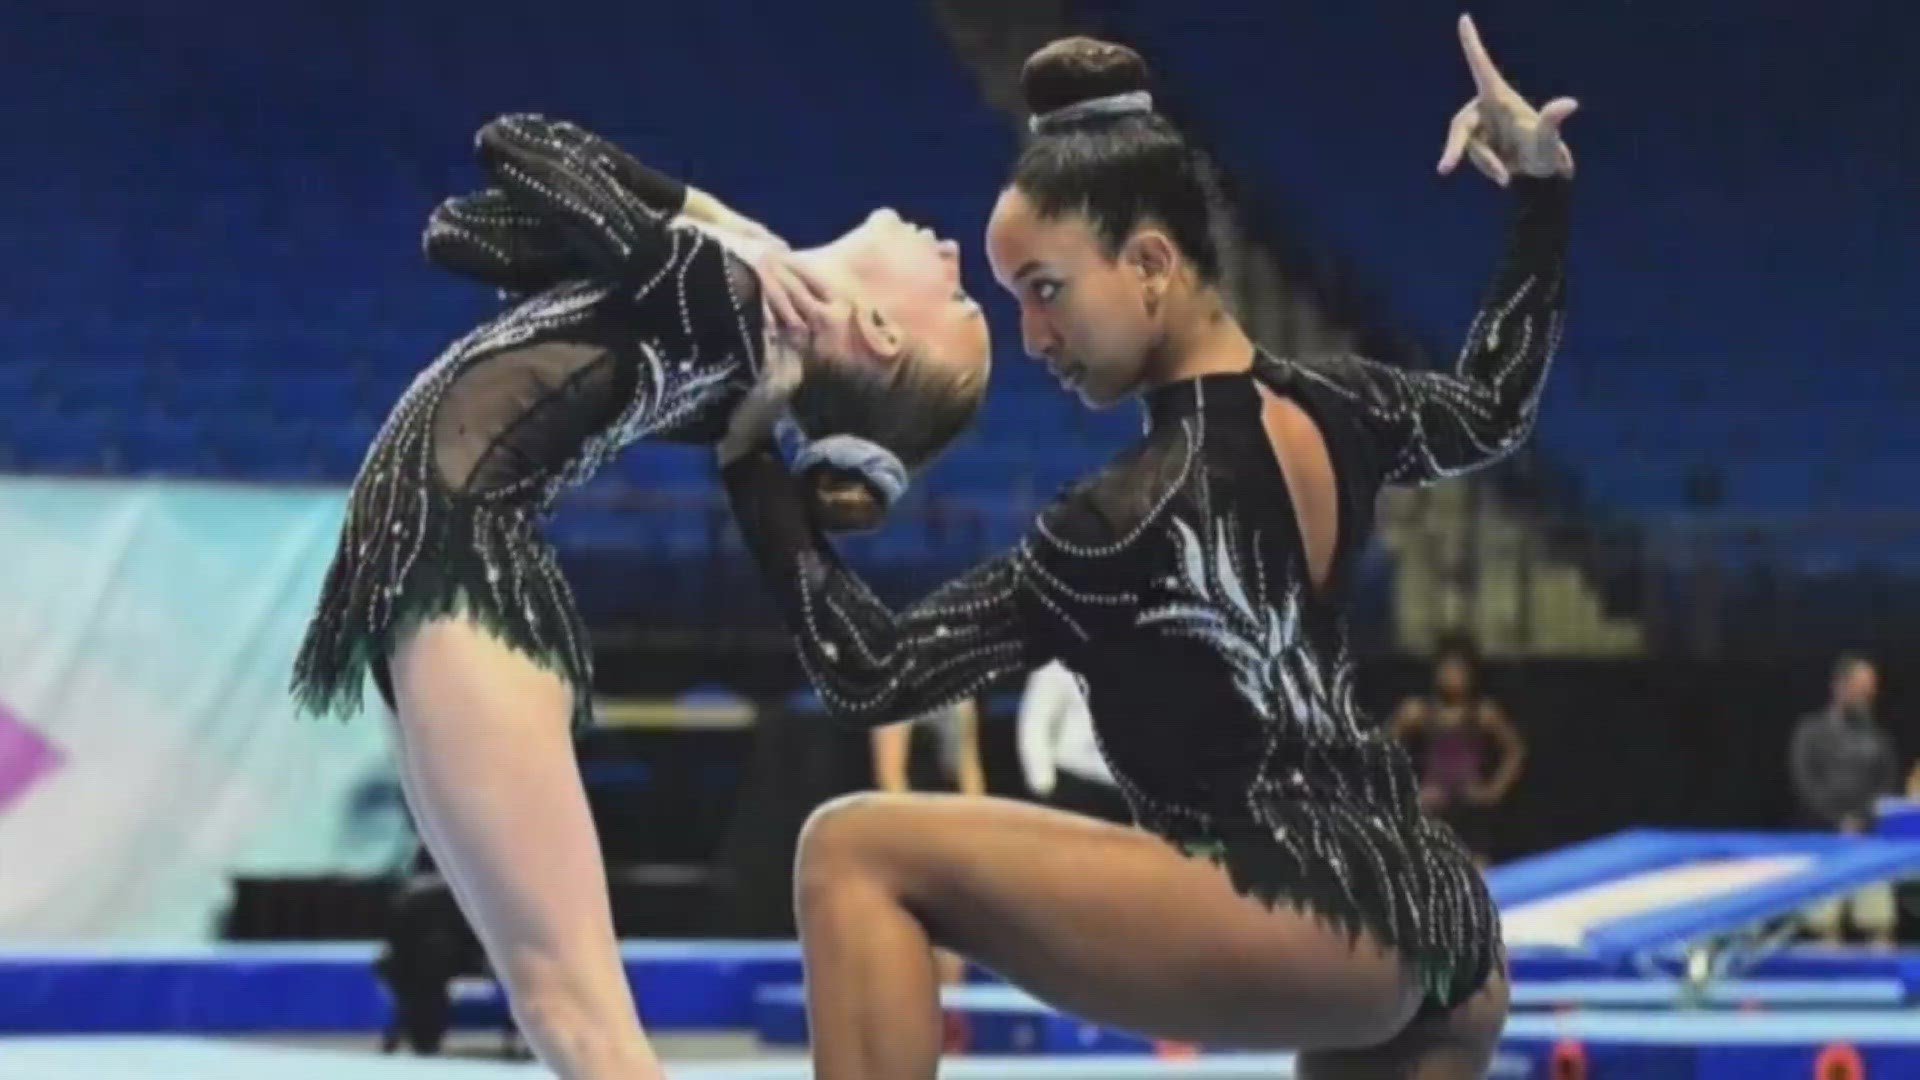 Isabella Brookins and Leana Borodayev are acrobatic gymnasts competing in the Pan American Championships.